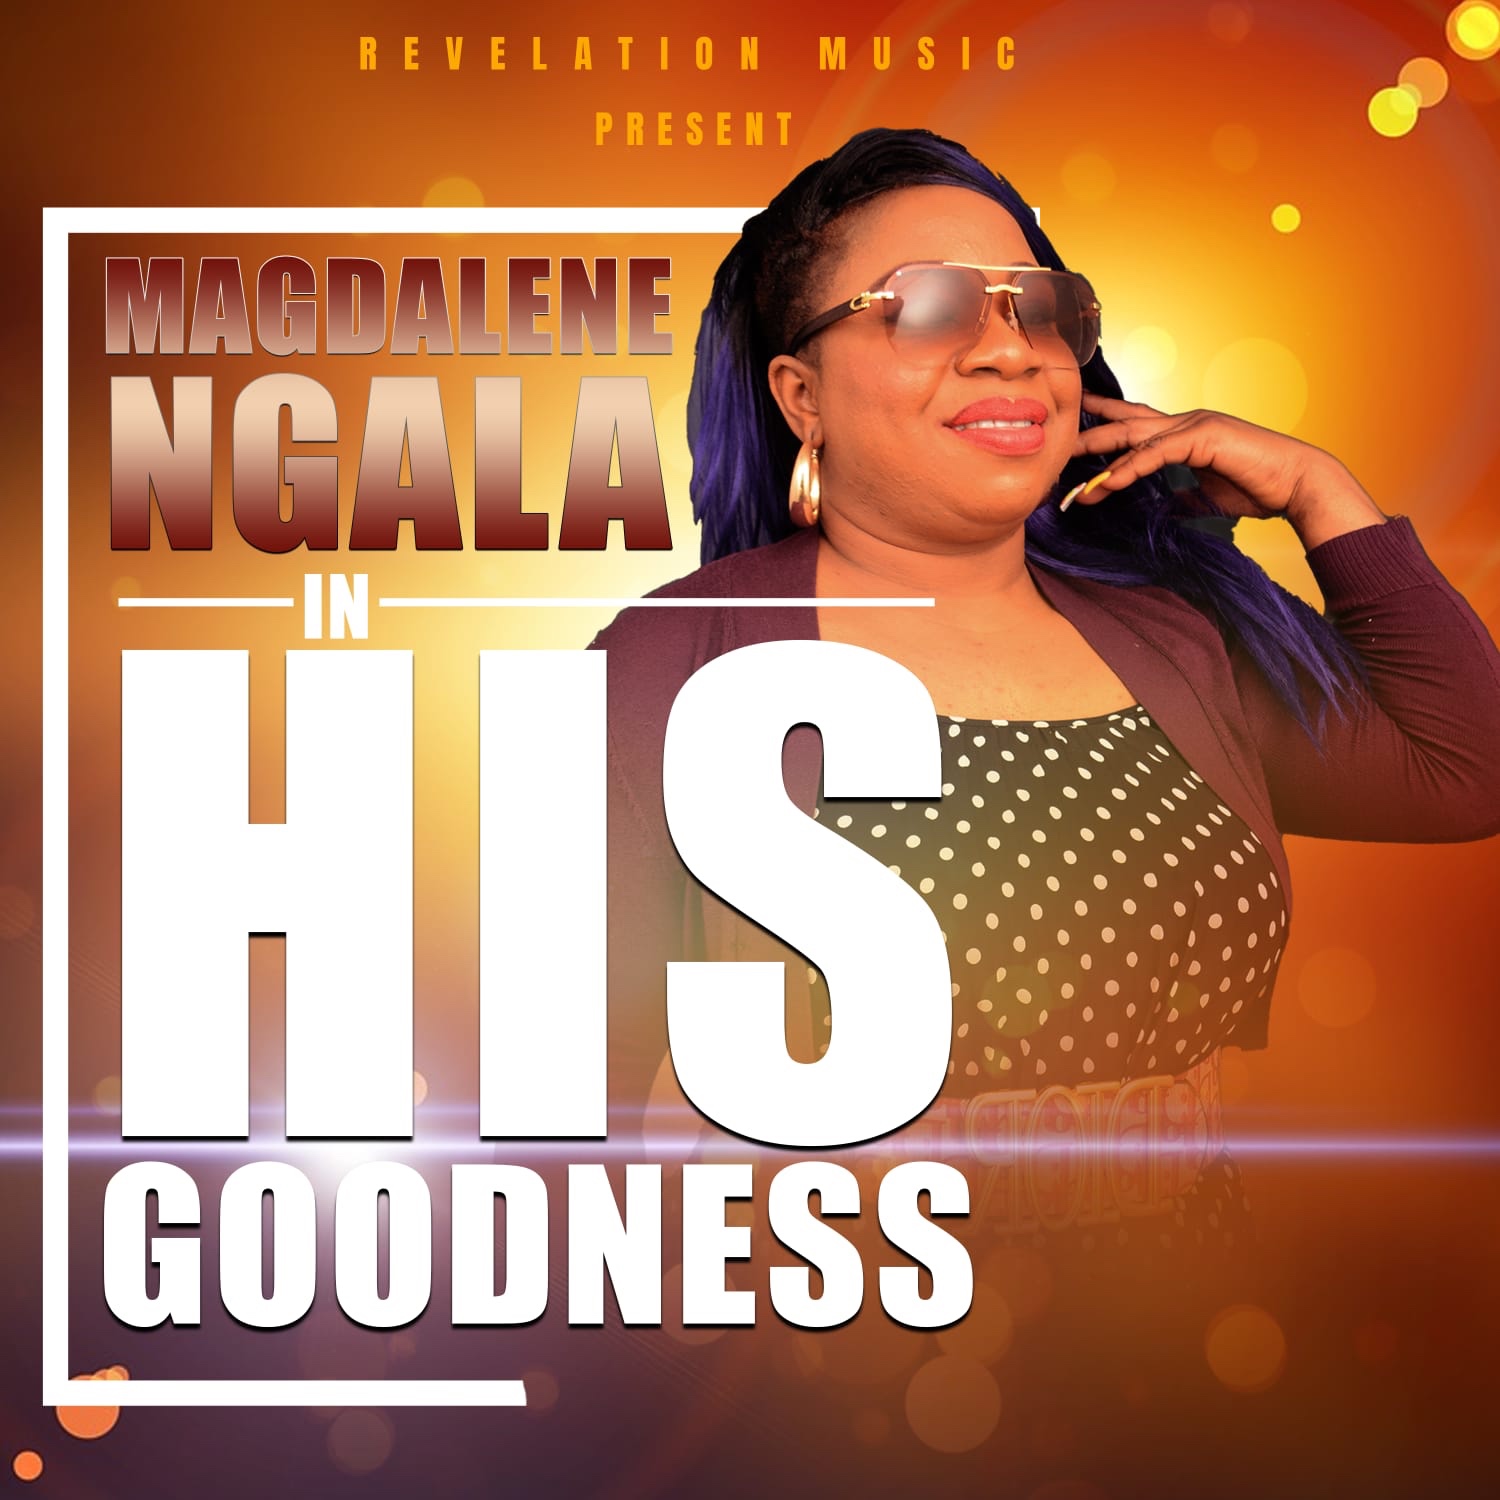 Igniting Profound Awe of Christ through Stirring Gospel Music - Magdalene Ngala’s New Track "His Goodness" Embraces Love